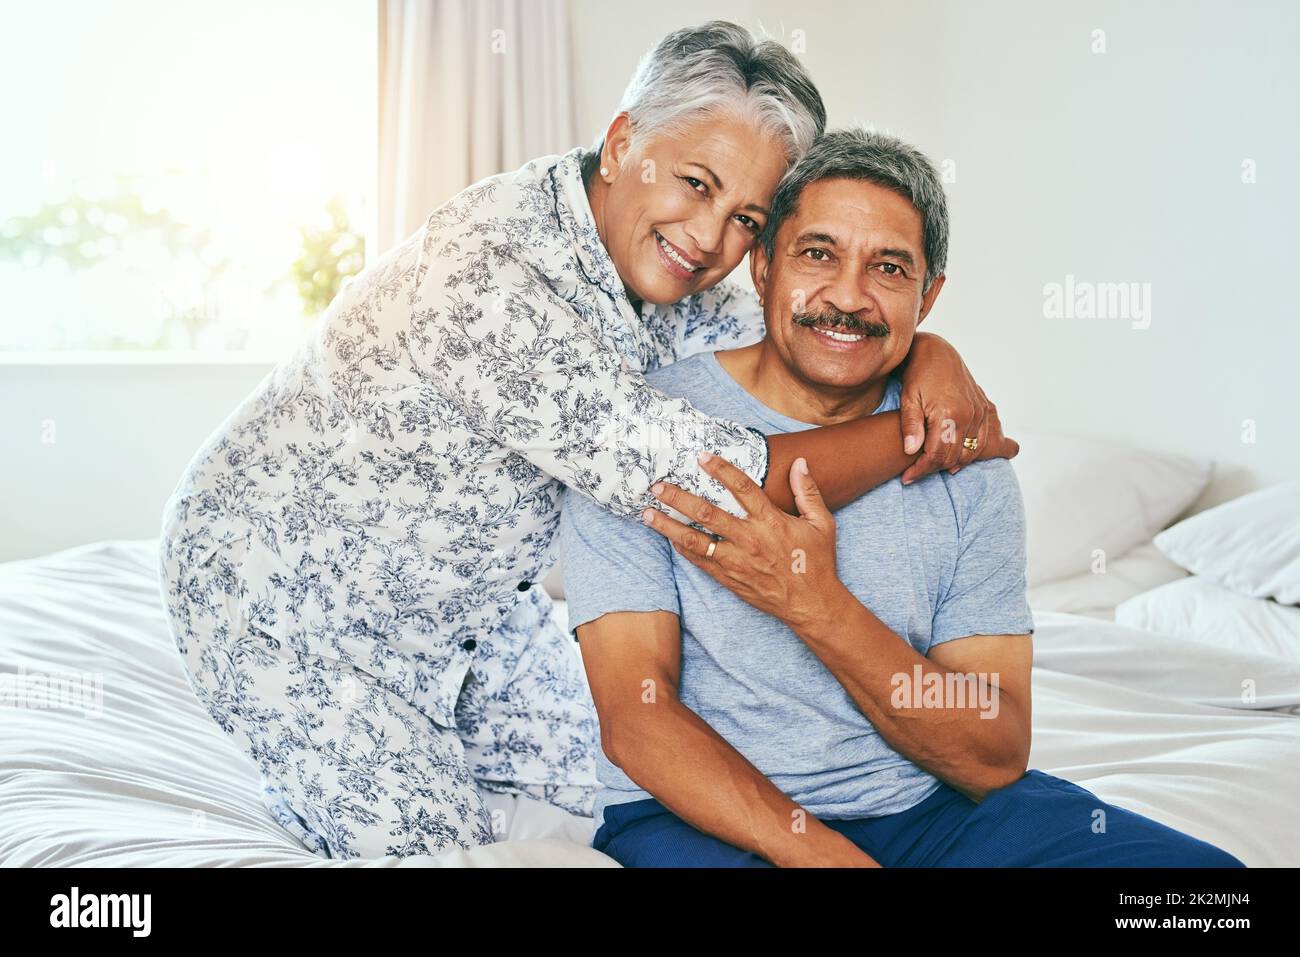 Life will never let us part. Portrait of a cheerful mature couple holding each other while being seated on a bed at home during the day. Stock Photo